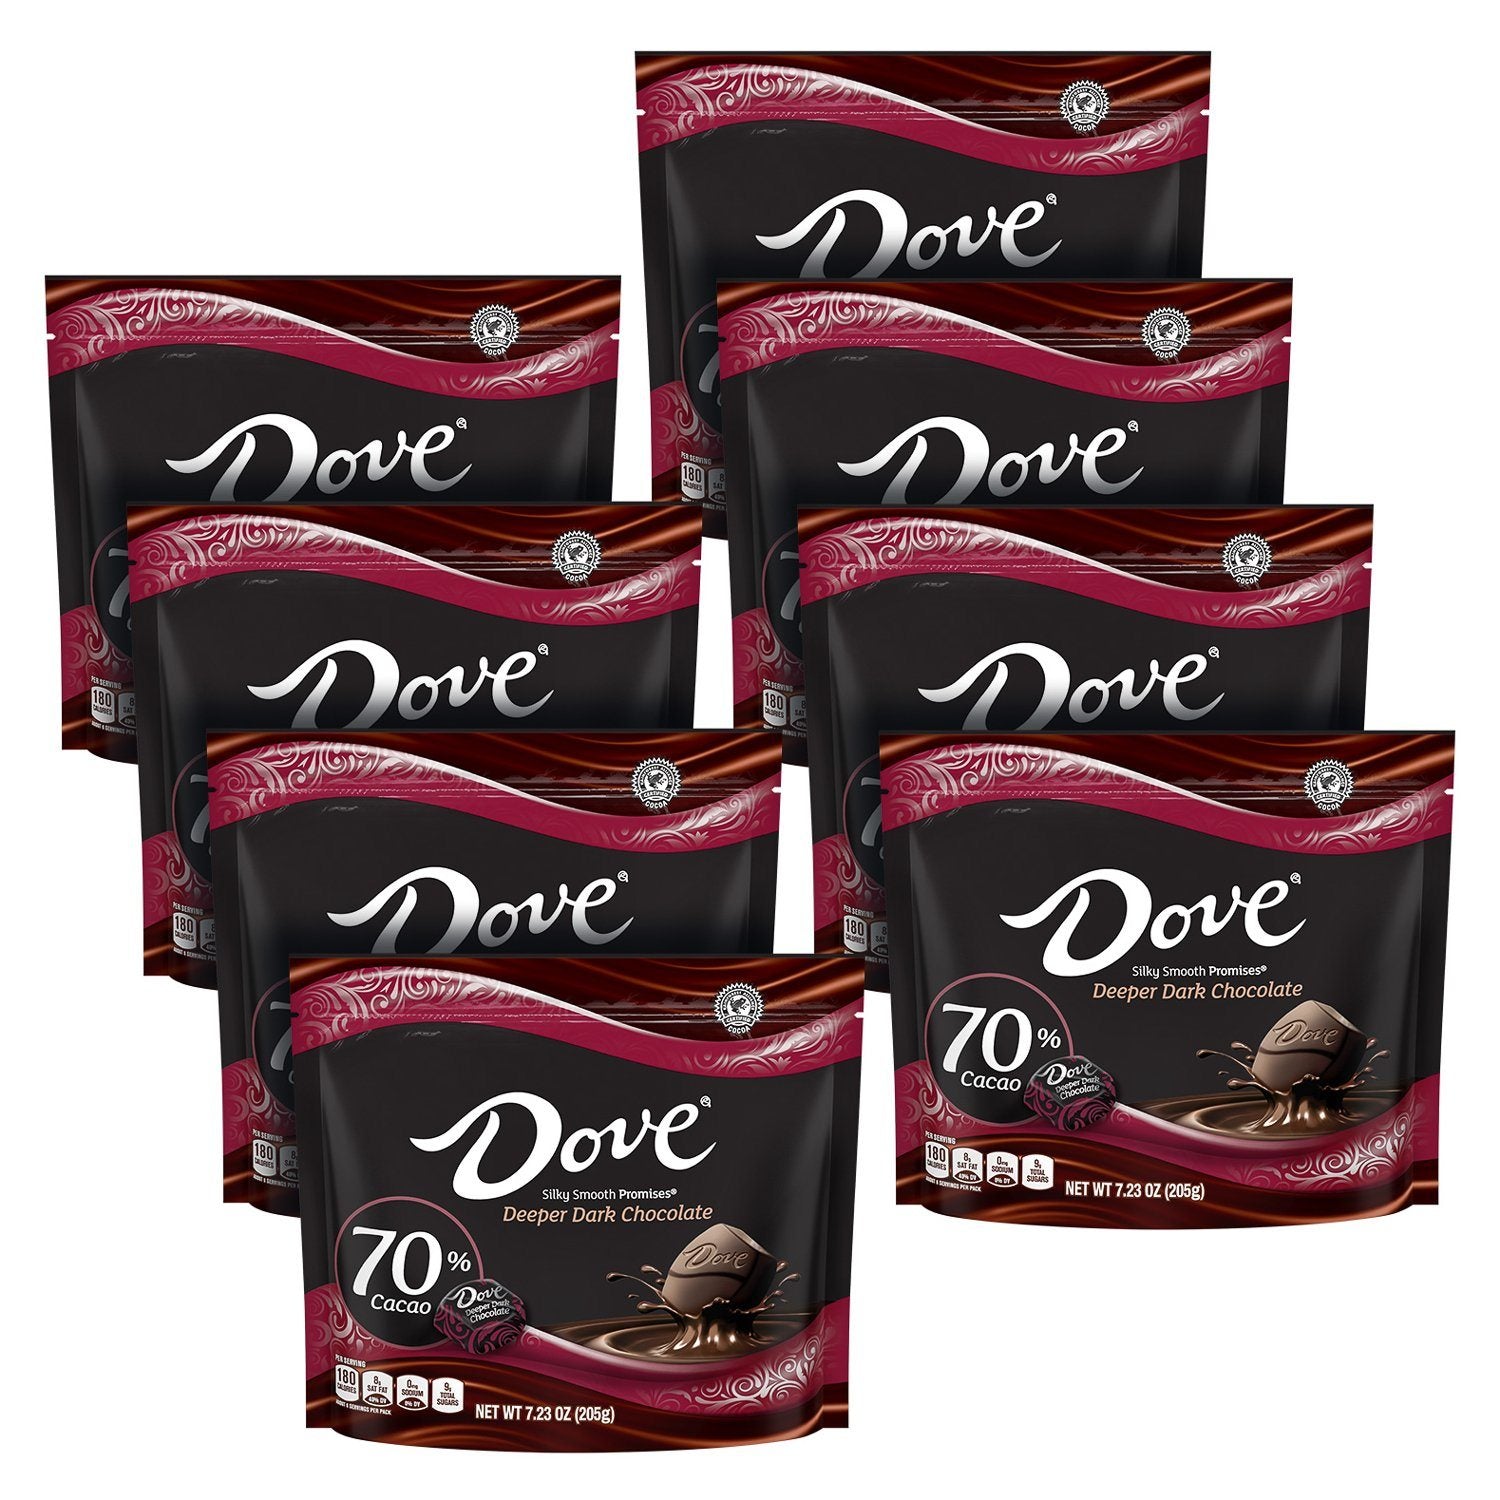 DOVE PROMISES Silky Smooth Chocolate Meltable Dove Dark Chocolate 70% 7.23 Oz-8 Count 